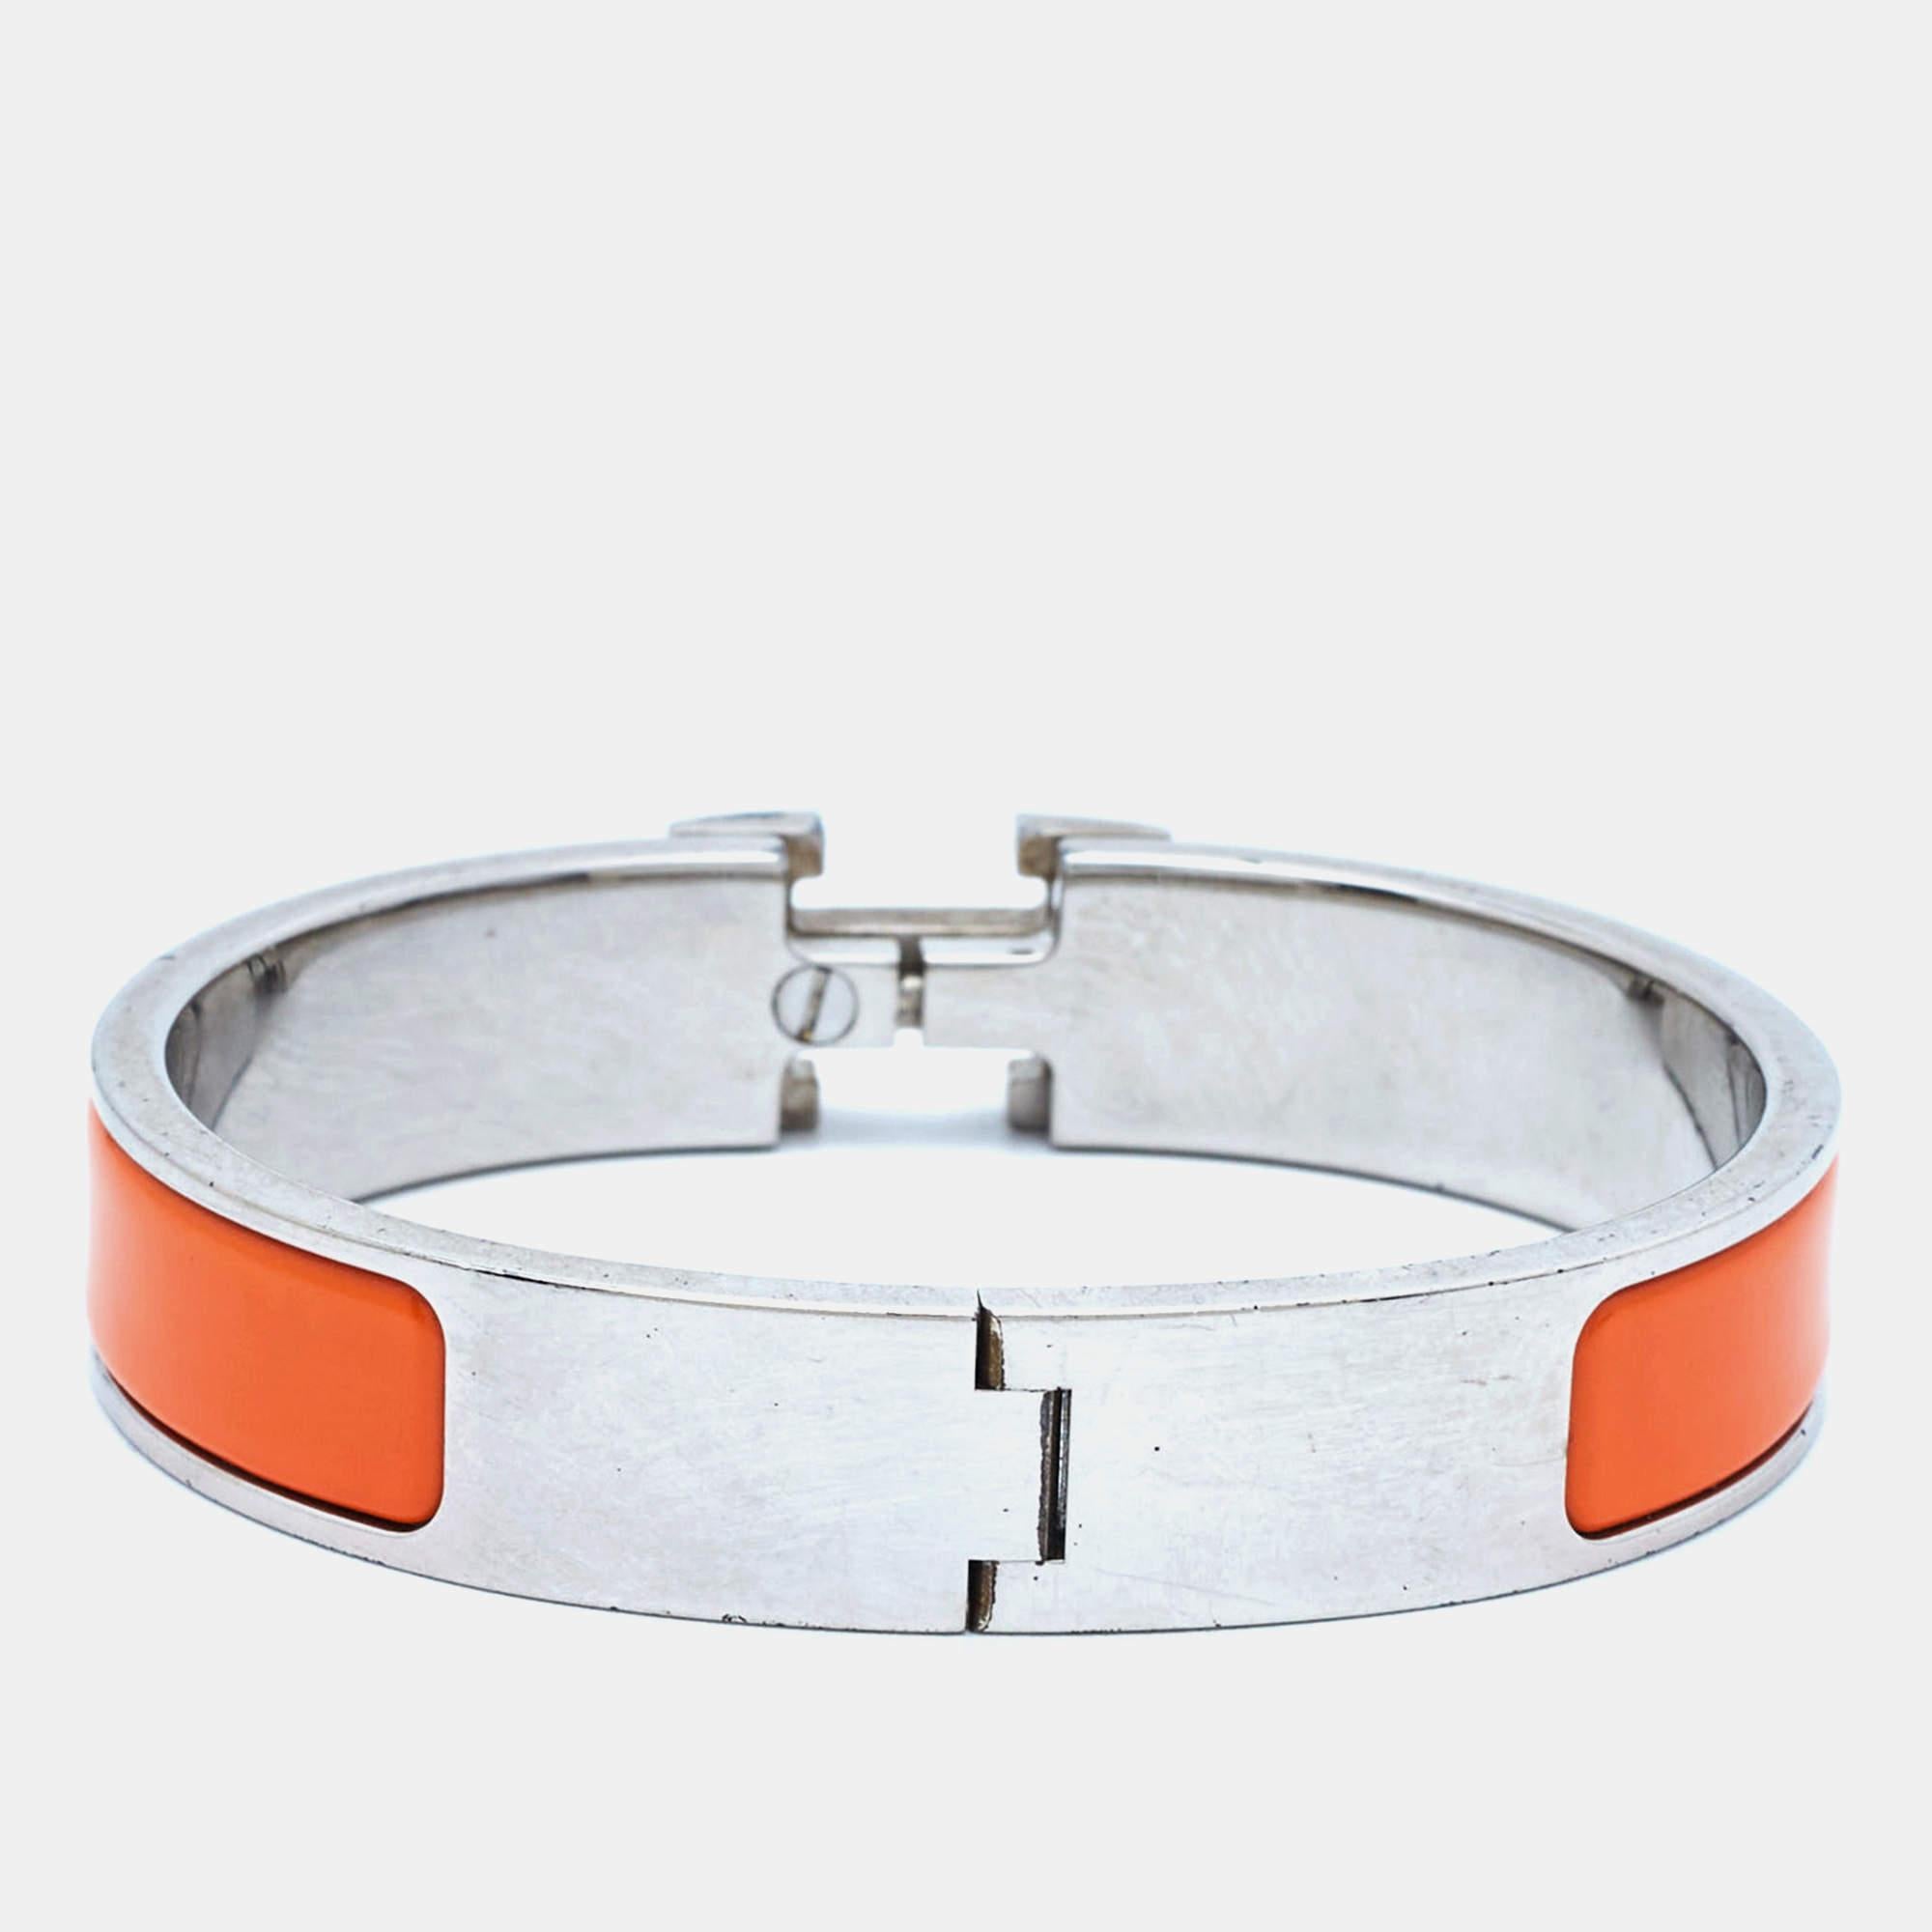 This Hermes bracelet is from the Clic H collection, and it has been crafted from palladium-plated metal and designed with enamel. This bracelet is complete with the iconic H at the center.

